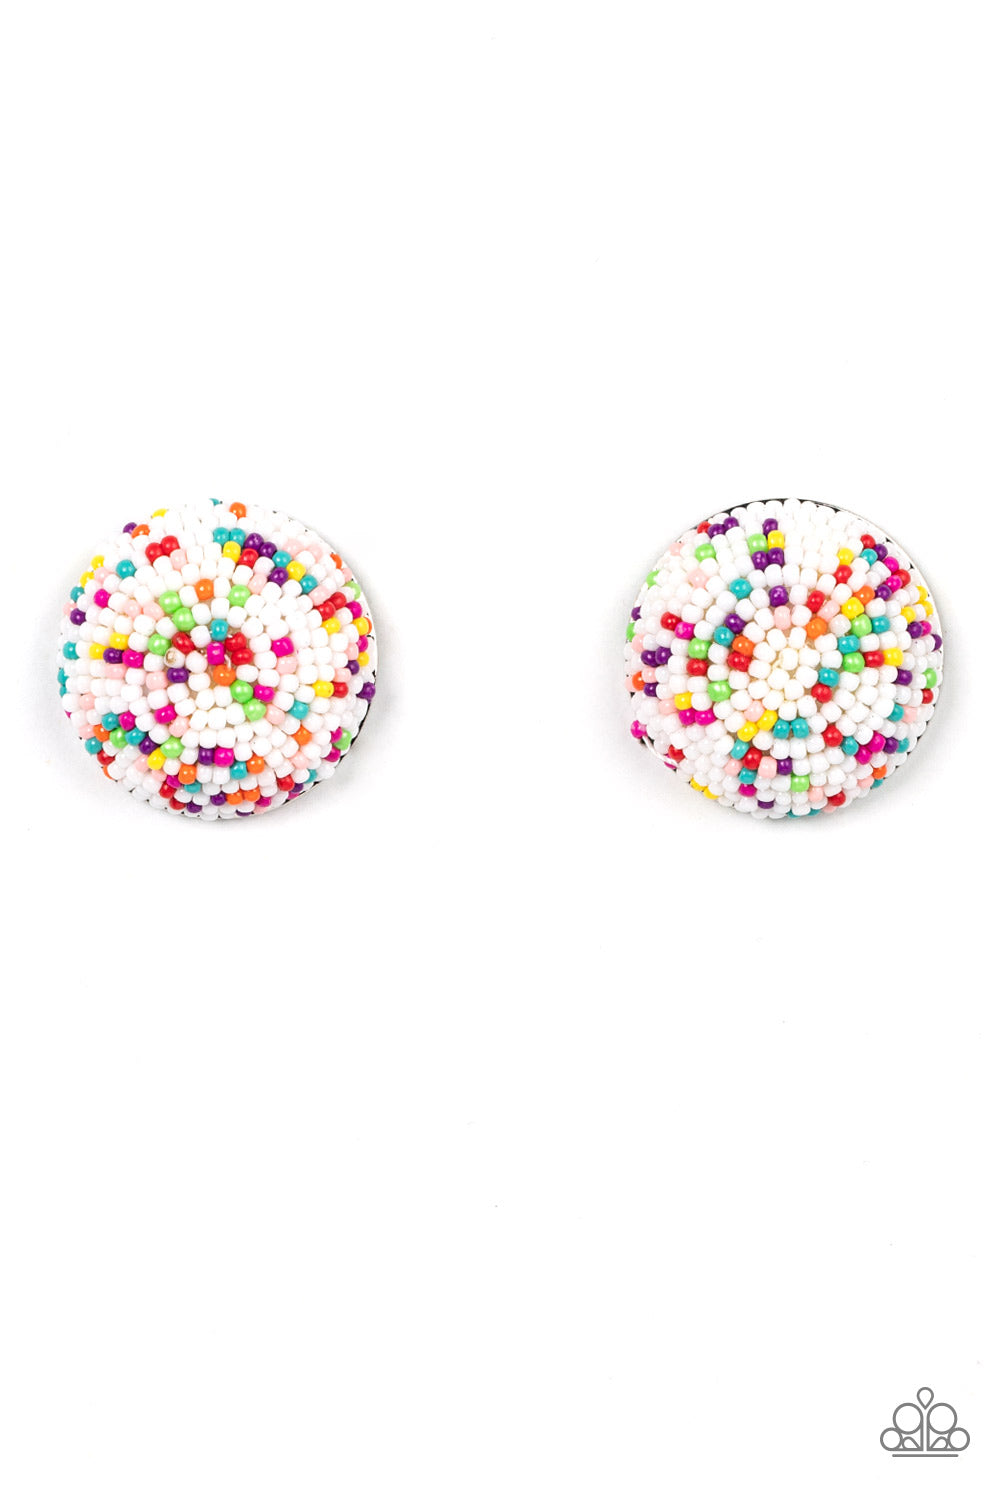 Kaleidoscope Sky - White Seed Bead Earrings a bubbly assortment of dainty multicolored beads spins around the front of an oversized and beveled silver frame, resulting in a boisterous pop of kaleidoscopic color. Earring attaches to a standard post fitting.  Sold as one pair of post earrings.